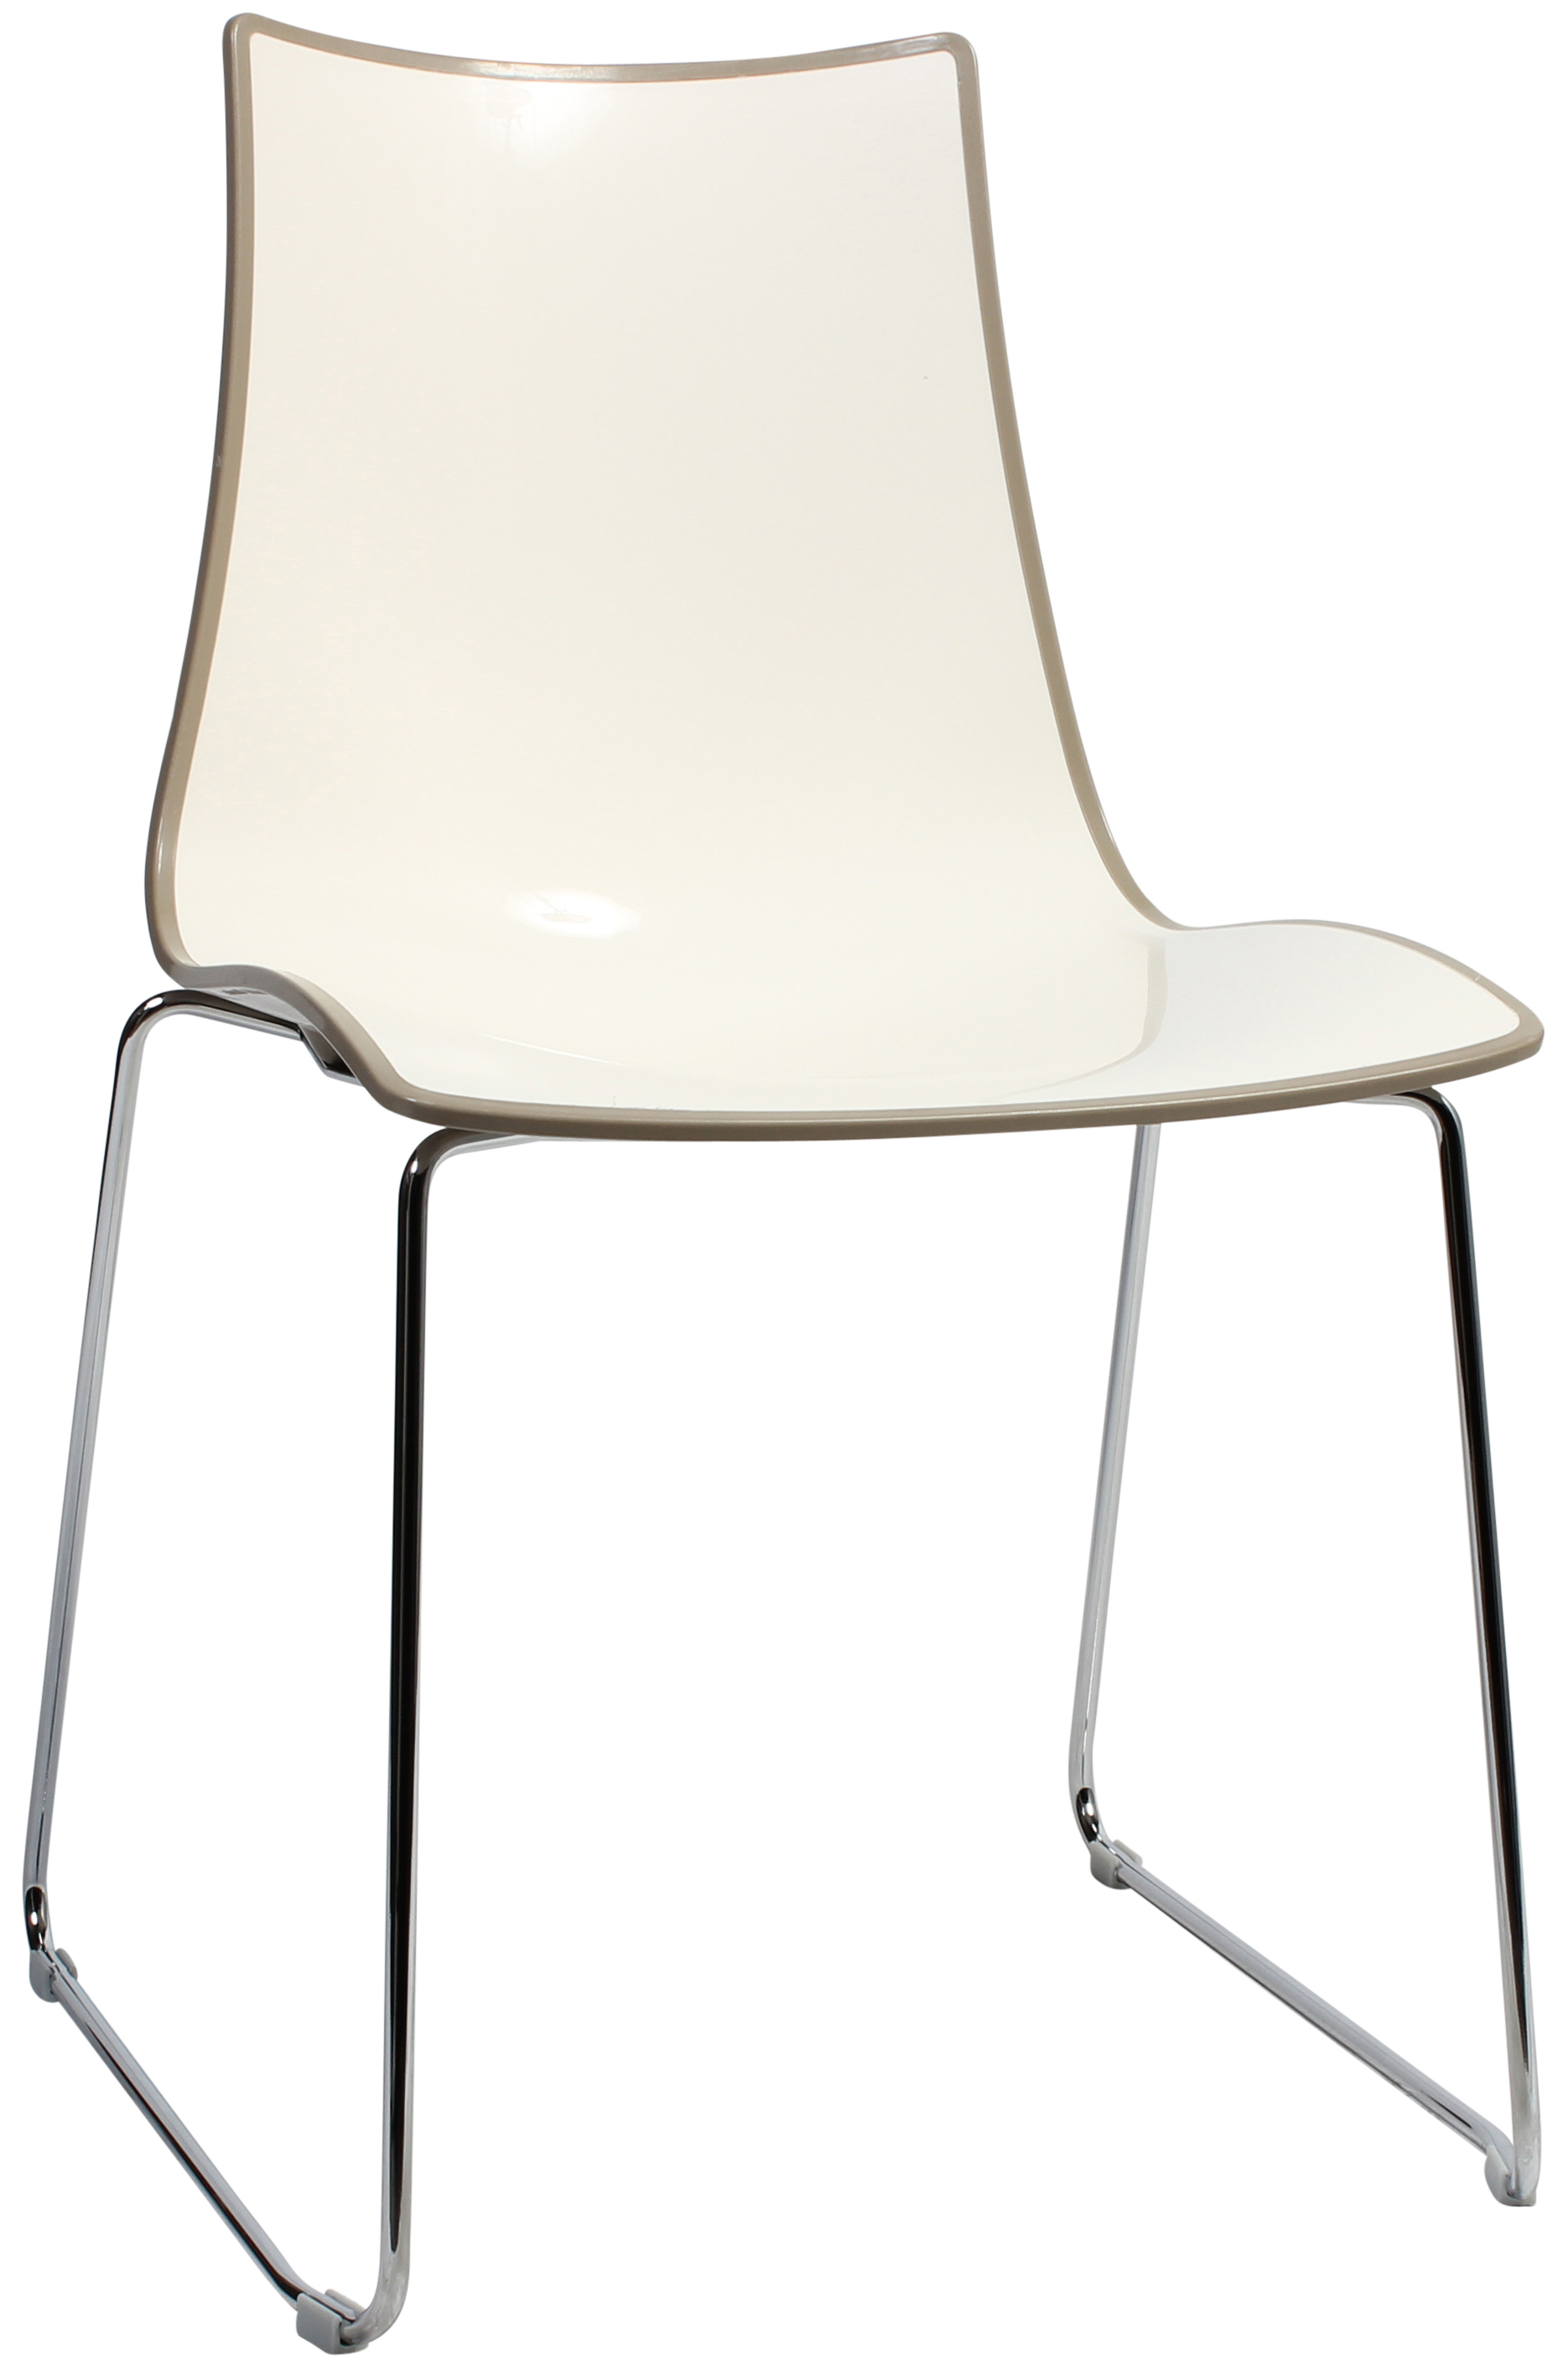 CHAIR BICOLORE SLED CHROME-TAUPE